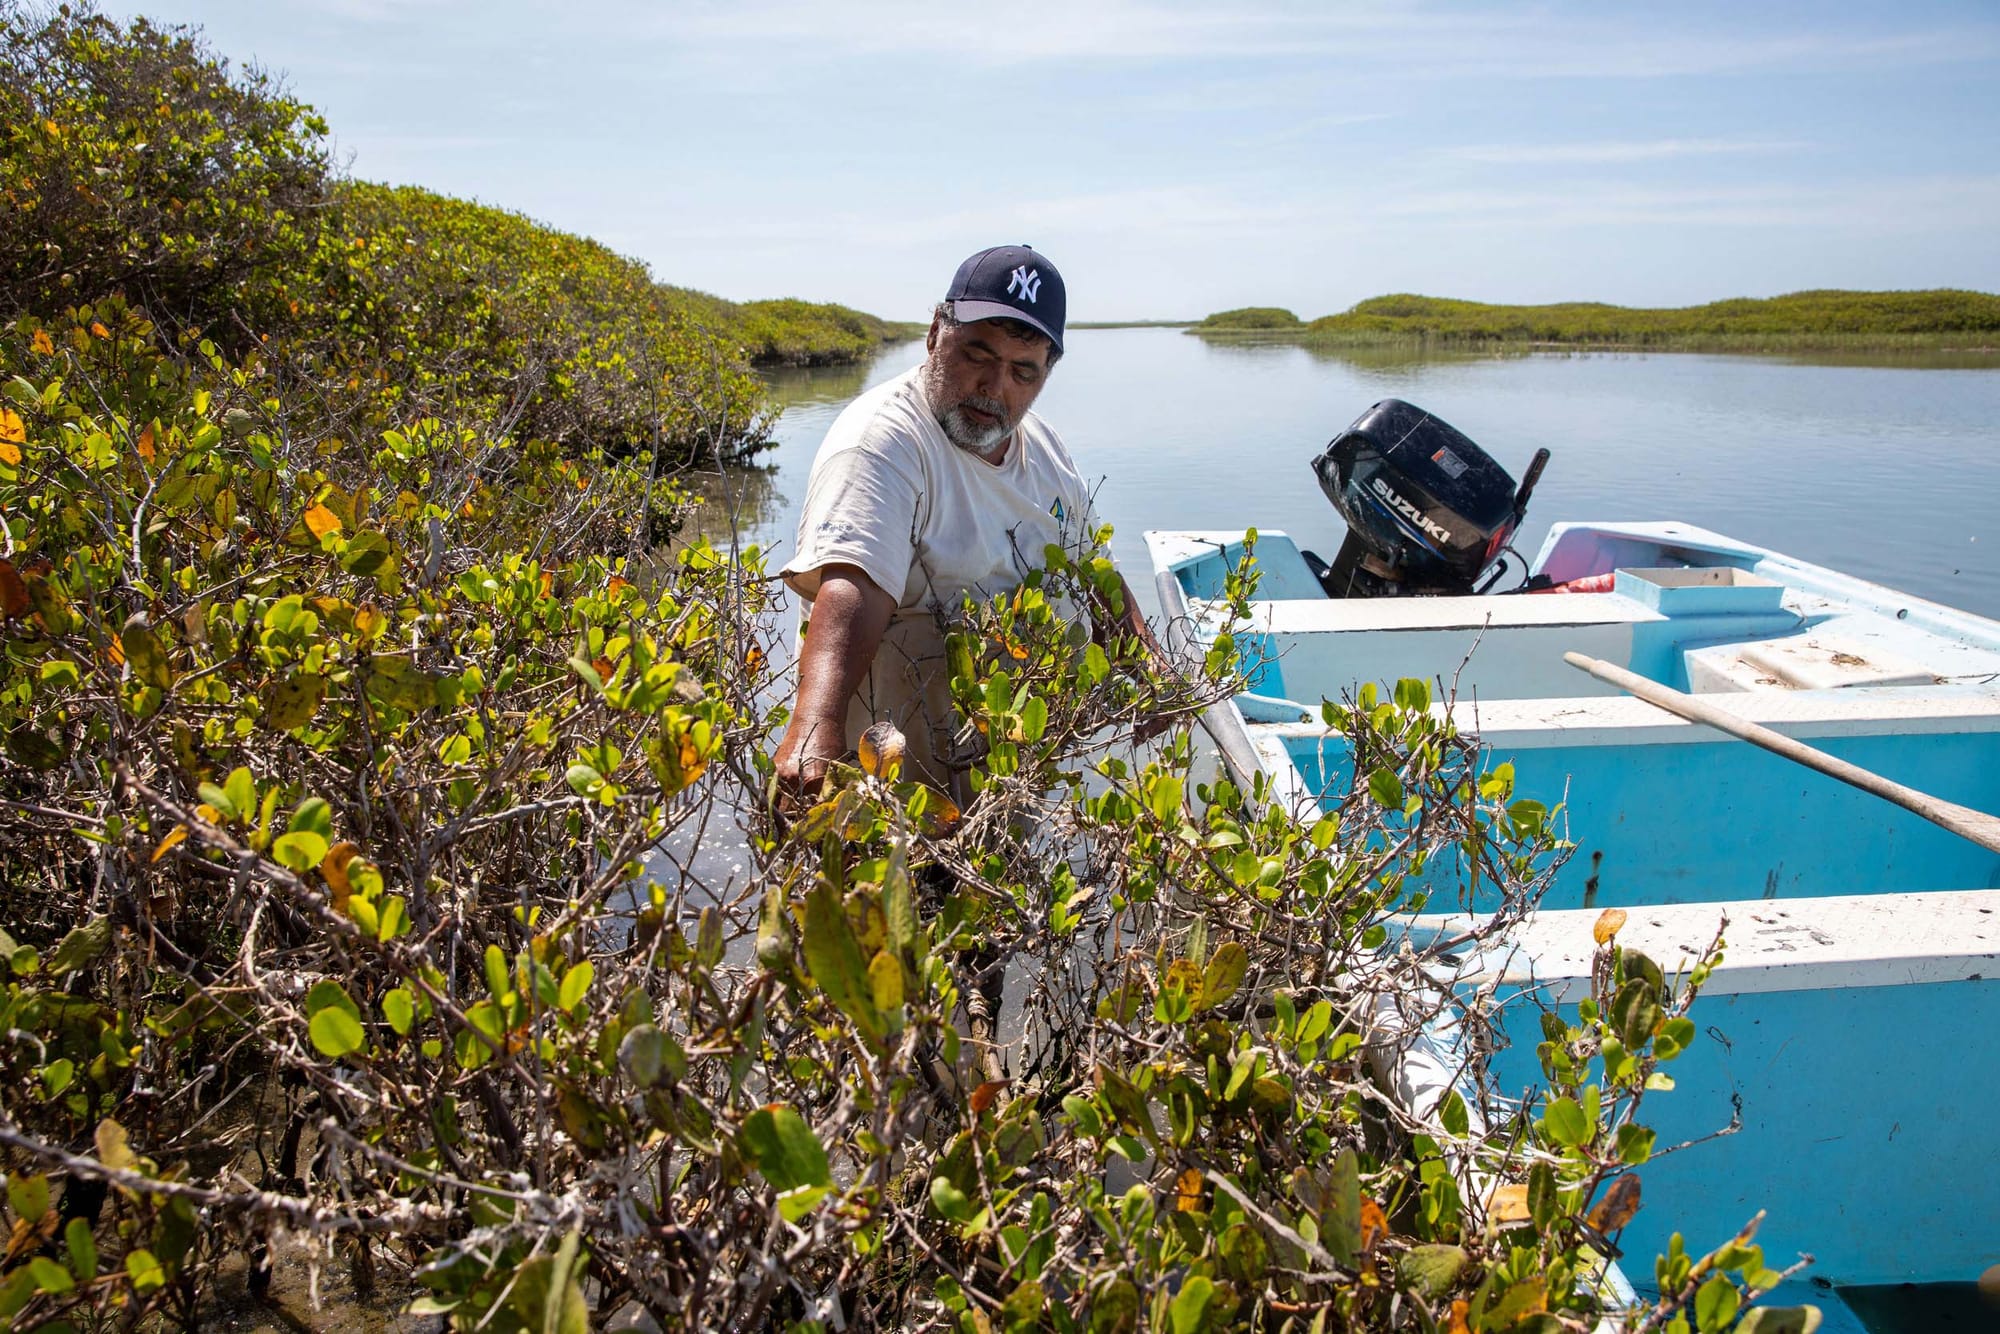 A person pointing at mangroves with a boat next to them